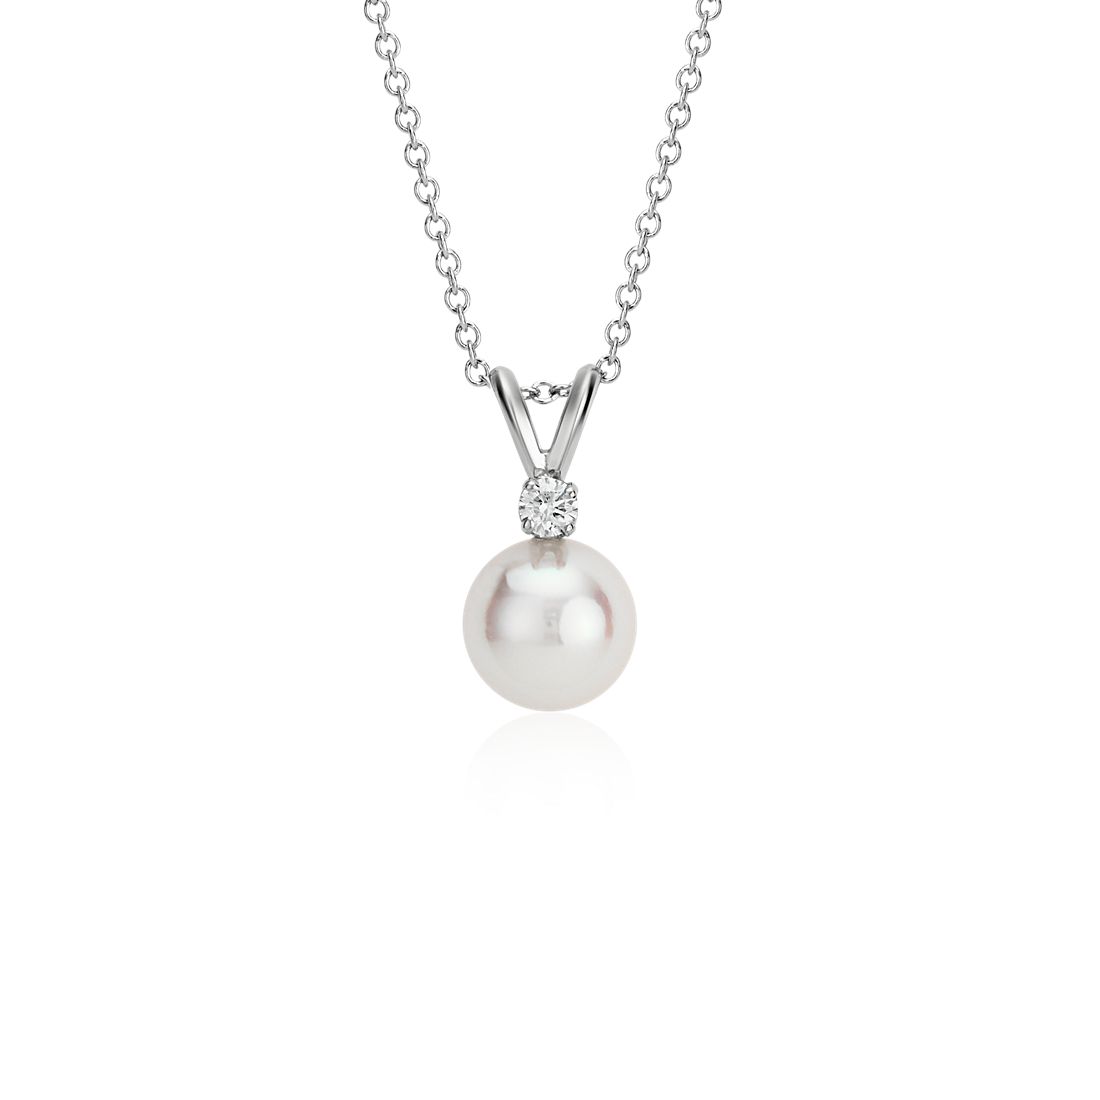 Premier Akoya Cultured Pearl and Diamond Pendant in 18k White Gold (8.0-8.5mm)